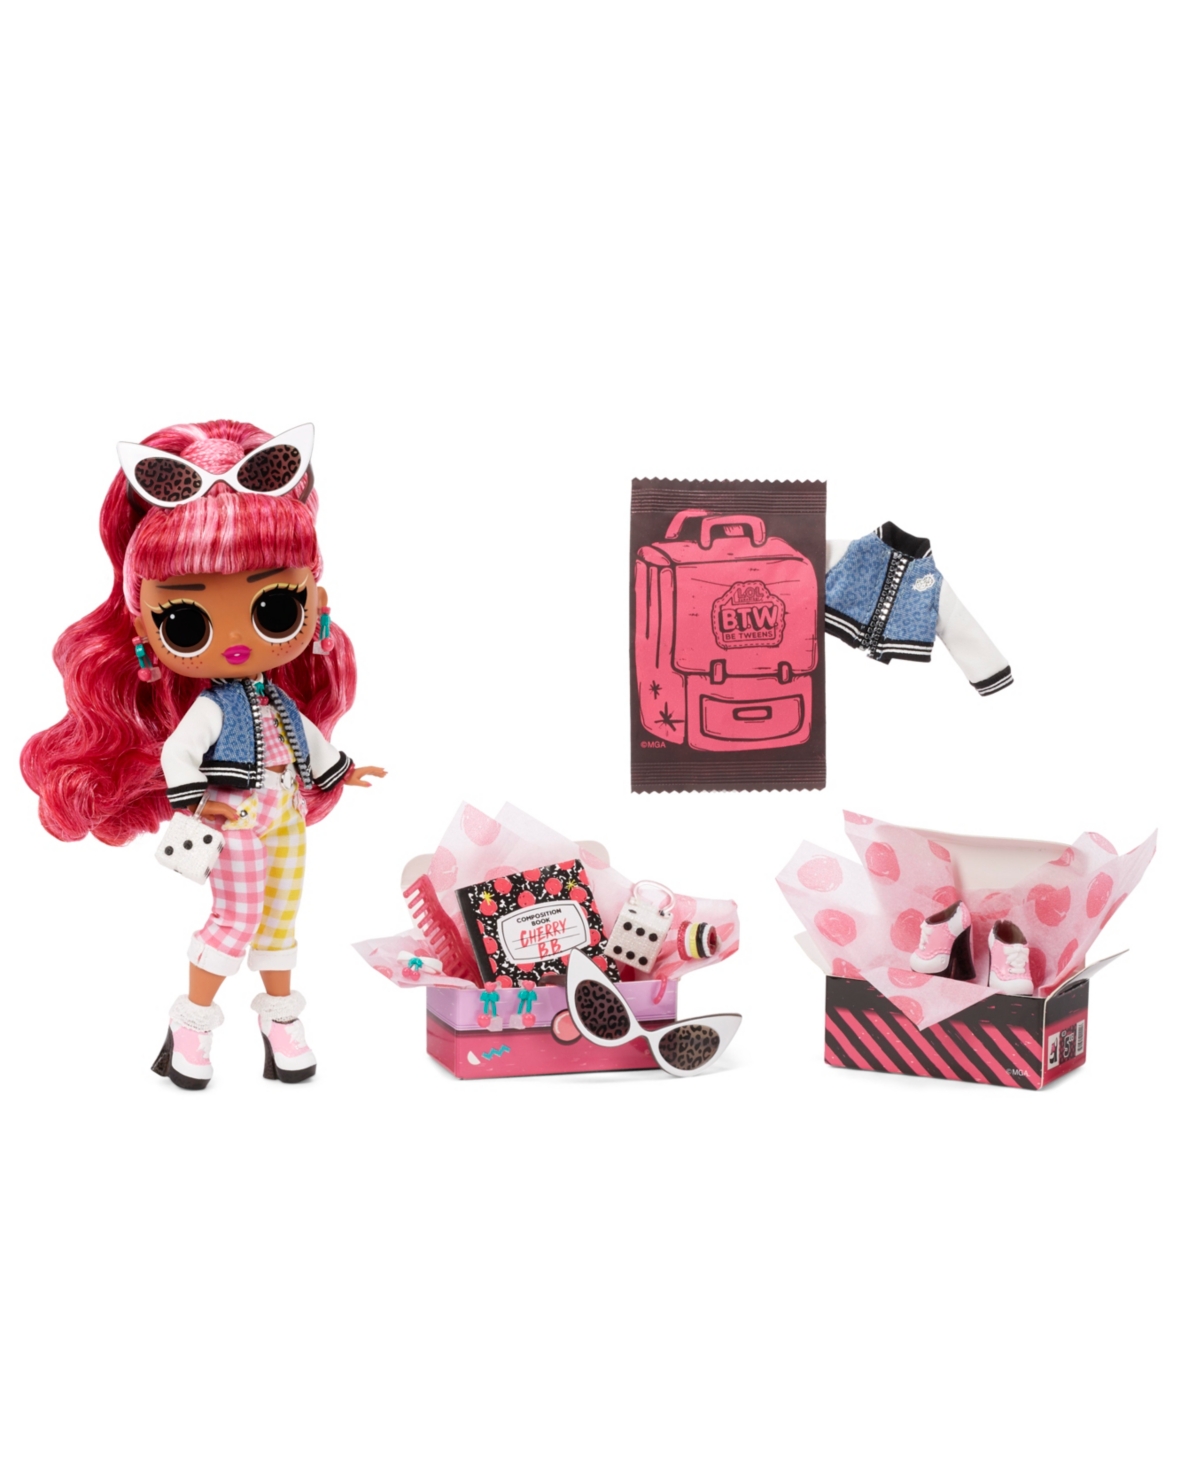 CHERRY RETRO CLUB SERIES 2 doll toy With bag LOL Surprise LiL Sisters L.O.L 